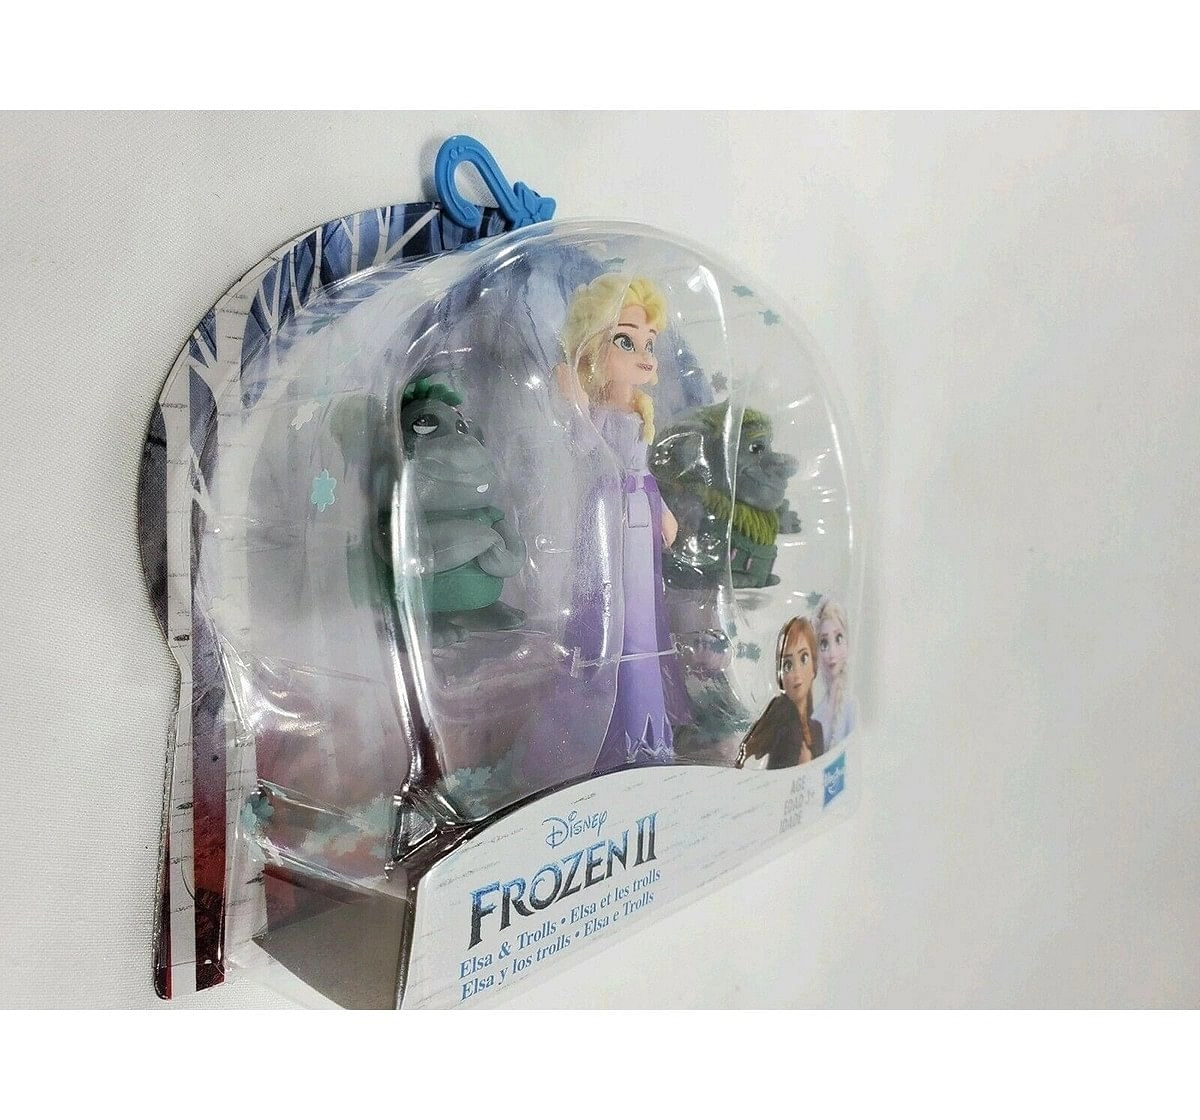 Disney Frozen 2 Elsa Small Doll And Friends Assorted Dolls & Accessories for Girls age 3Y+ 